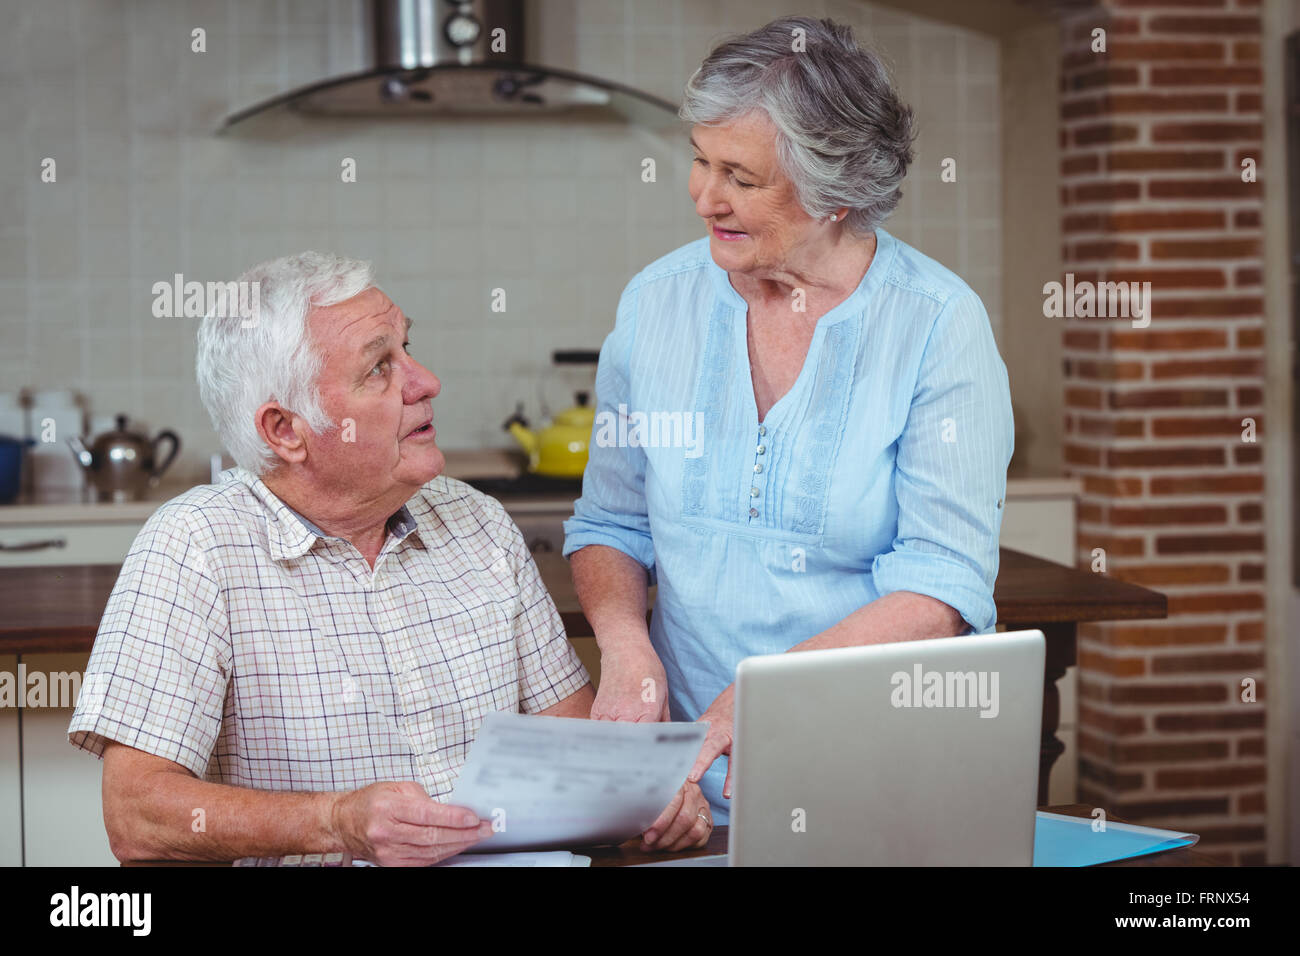 Retired couple discussing while calculating bills with laptop Stock Photo